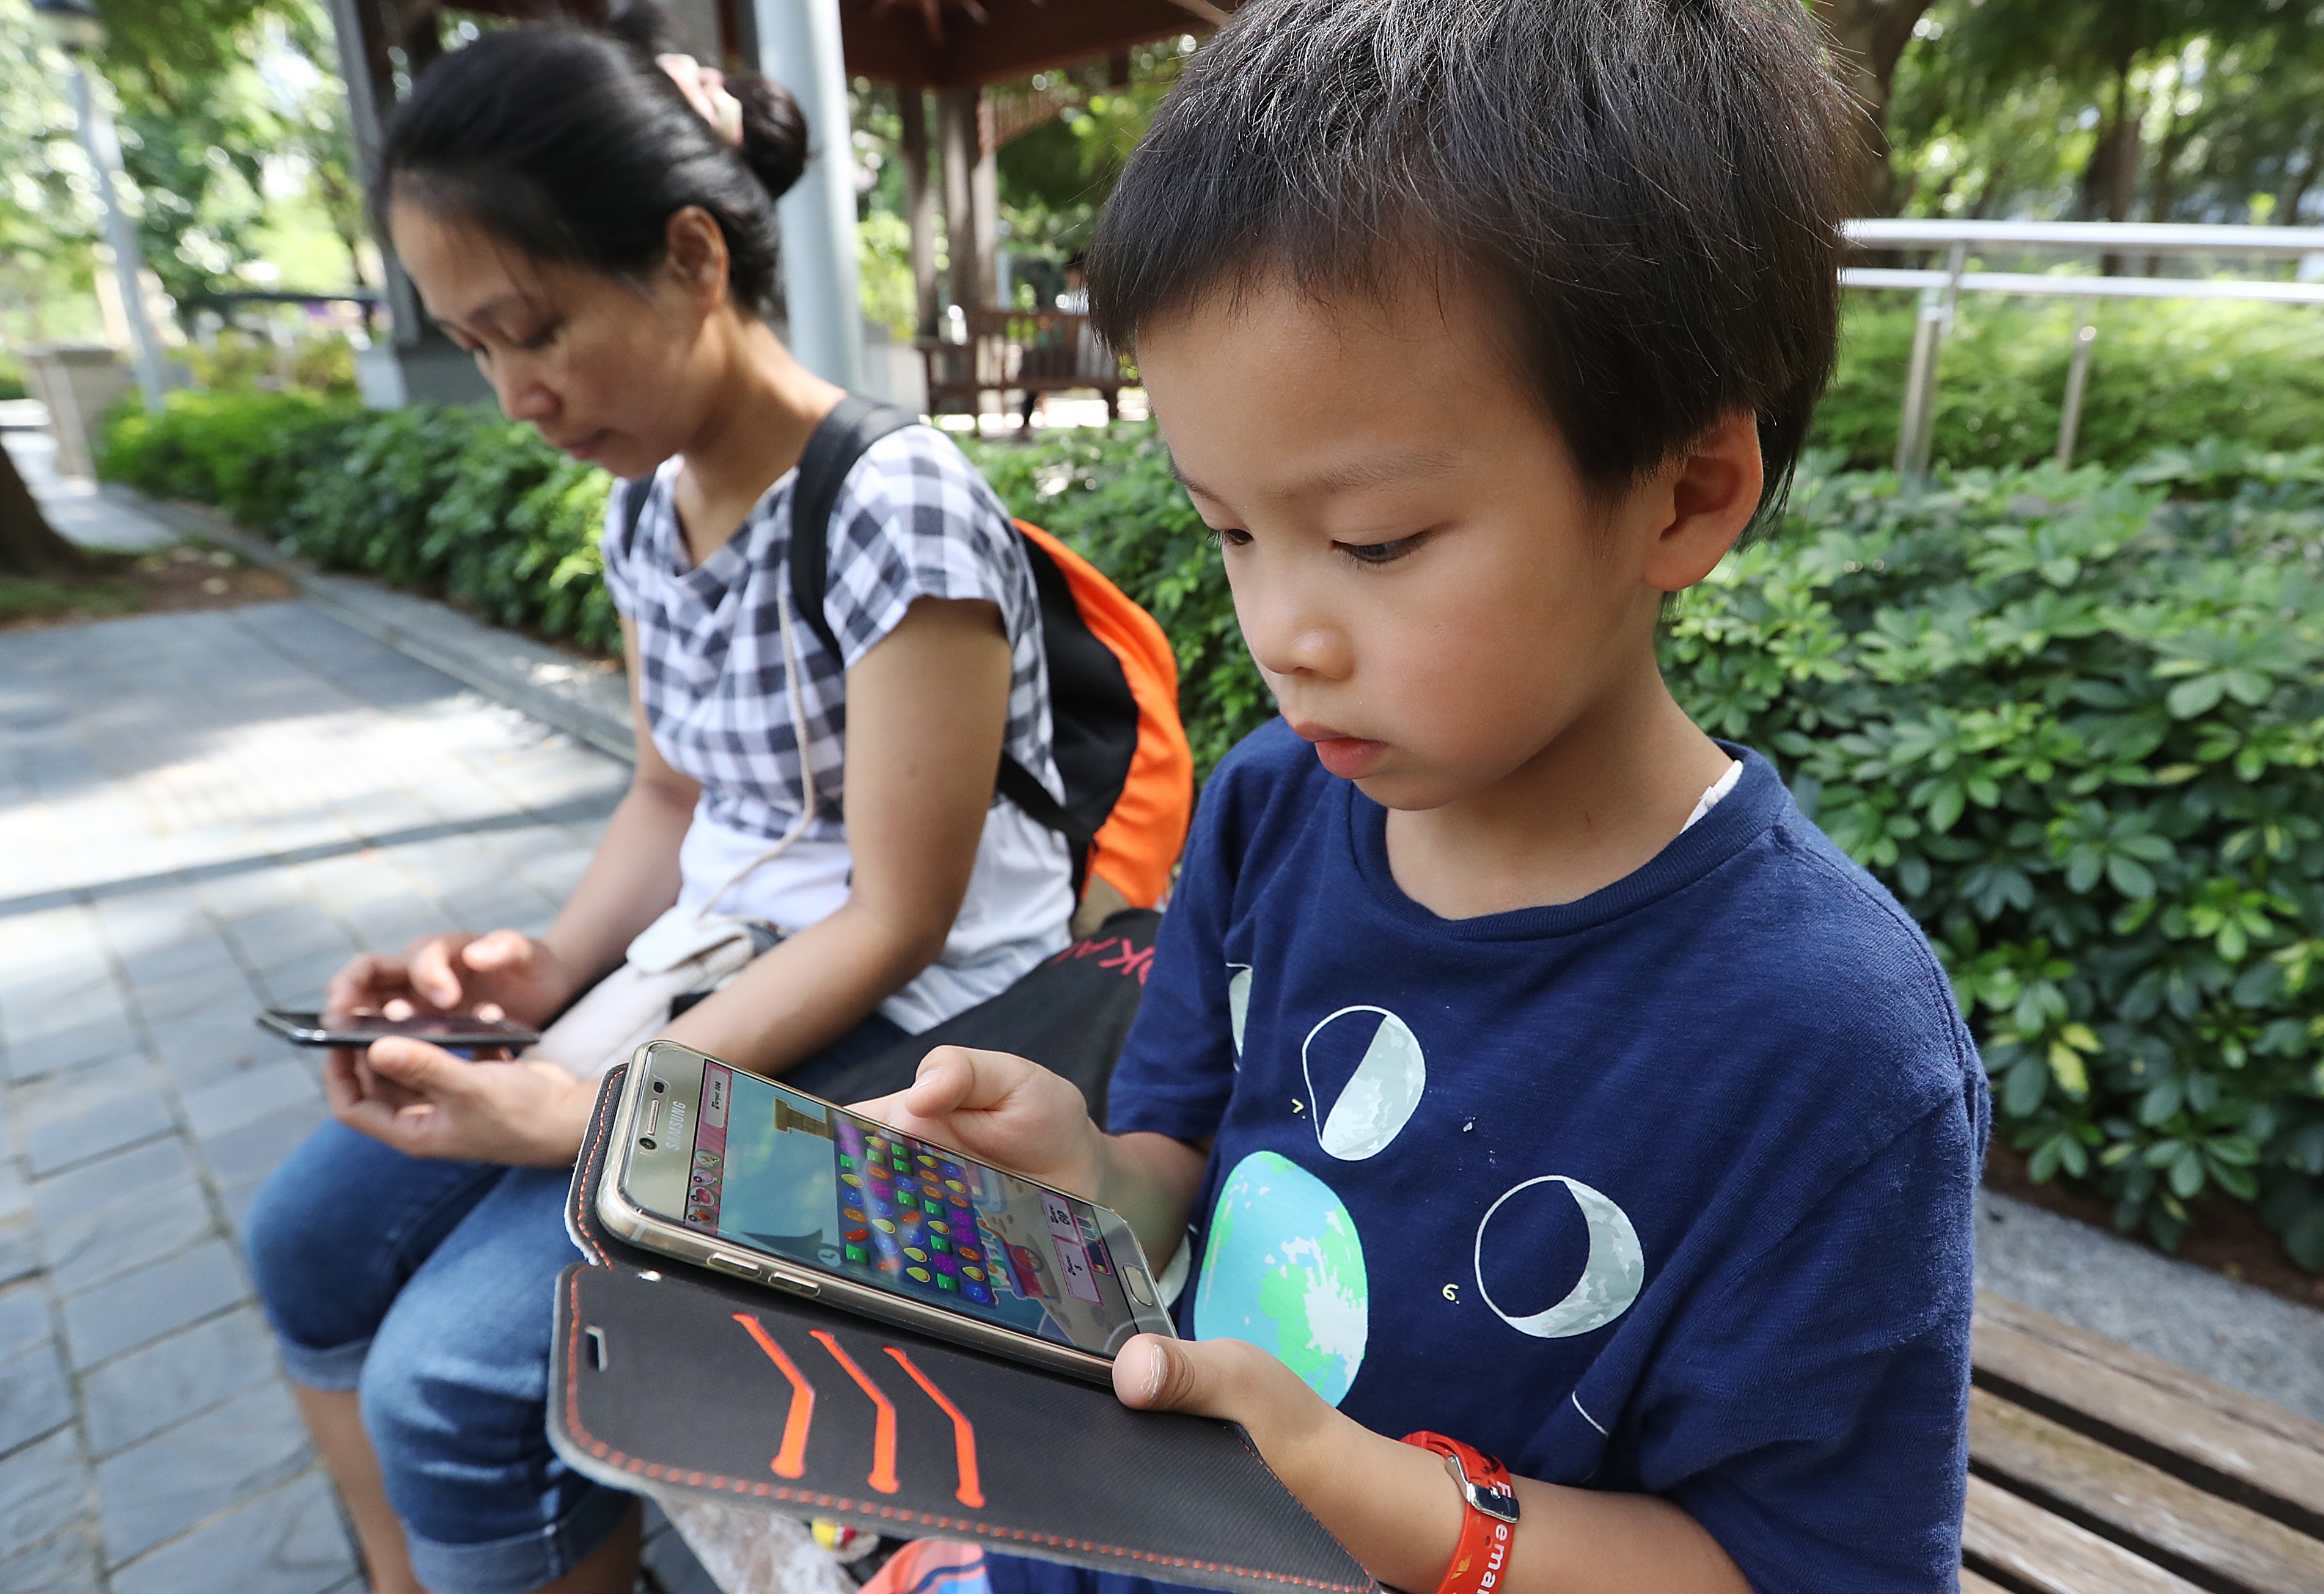 Mobile devices have become “essentials” for children nowadays. Photo: Edward Wong